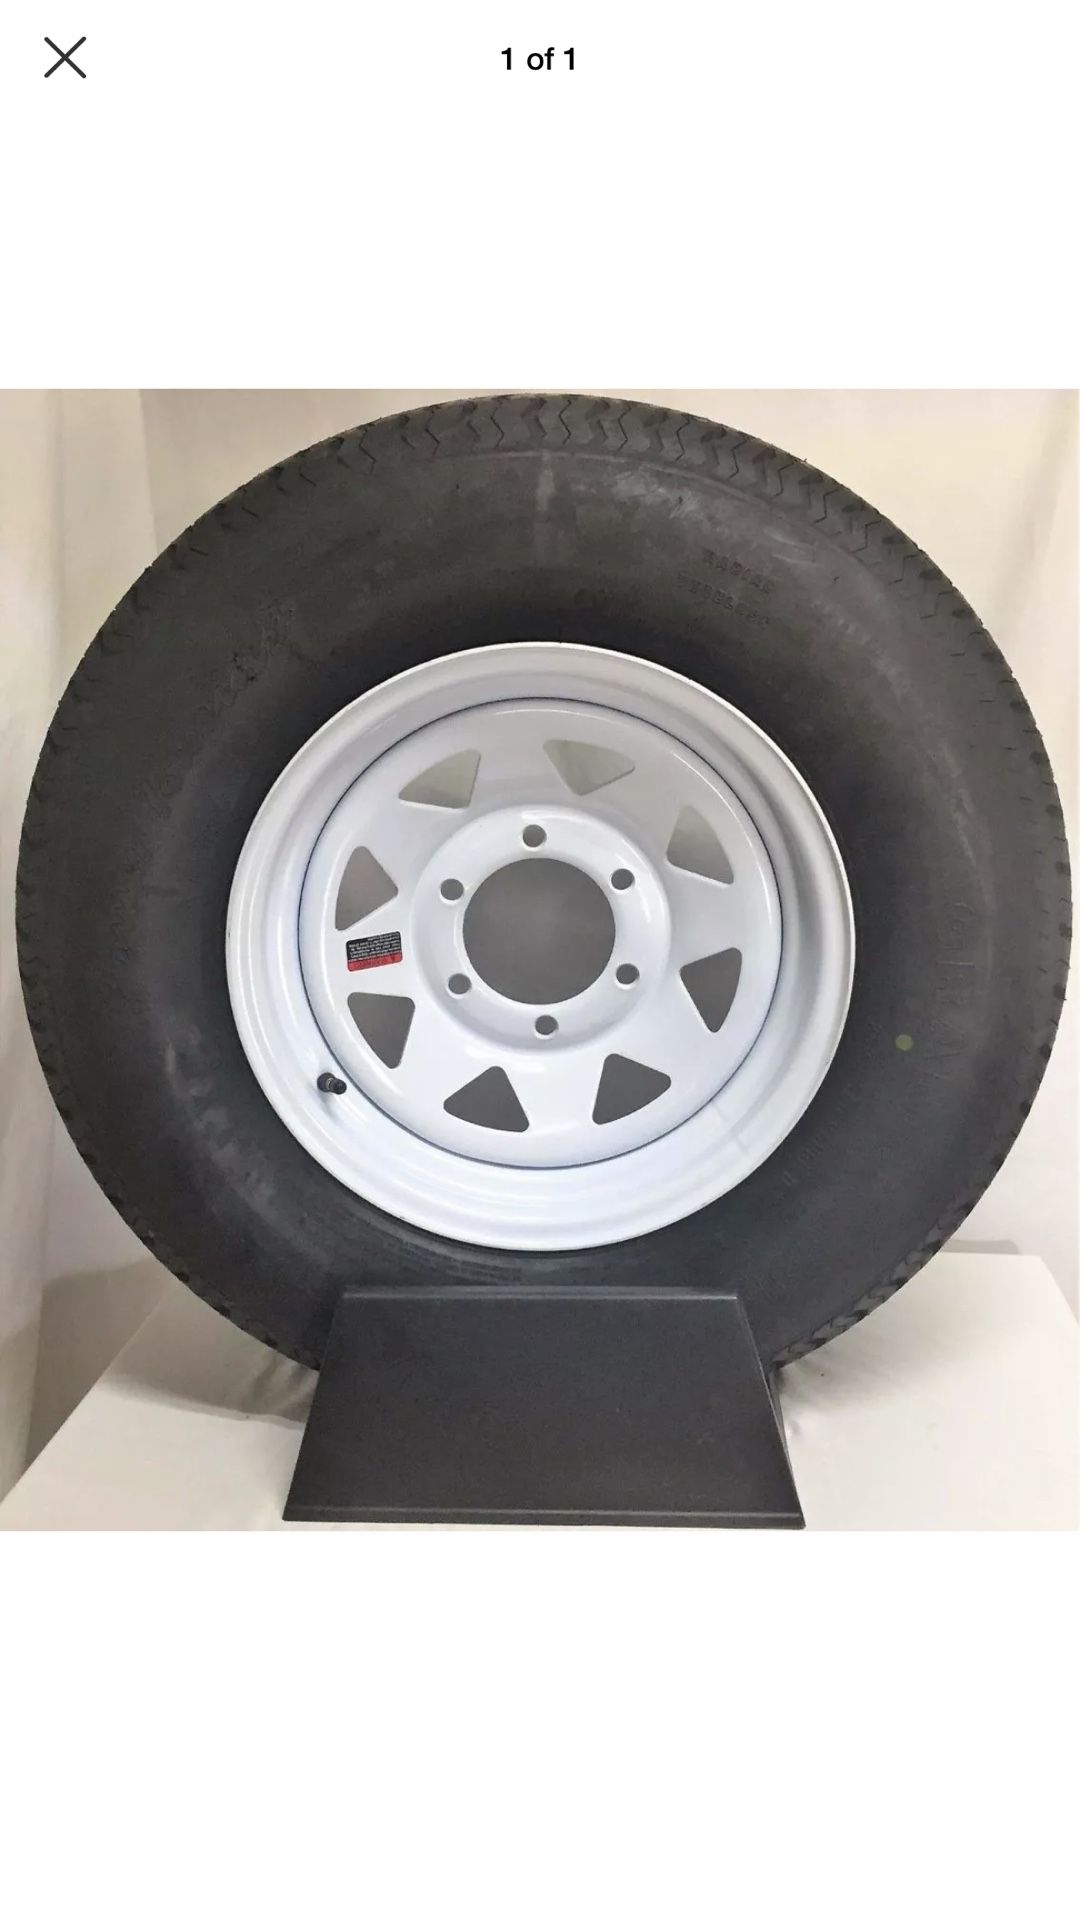 15" 6X5.5 White Spoke Trailer Wheel with Radial ST225/75R15 10 PLY Tire Mounted $115 no bargain